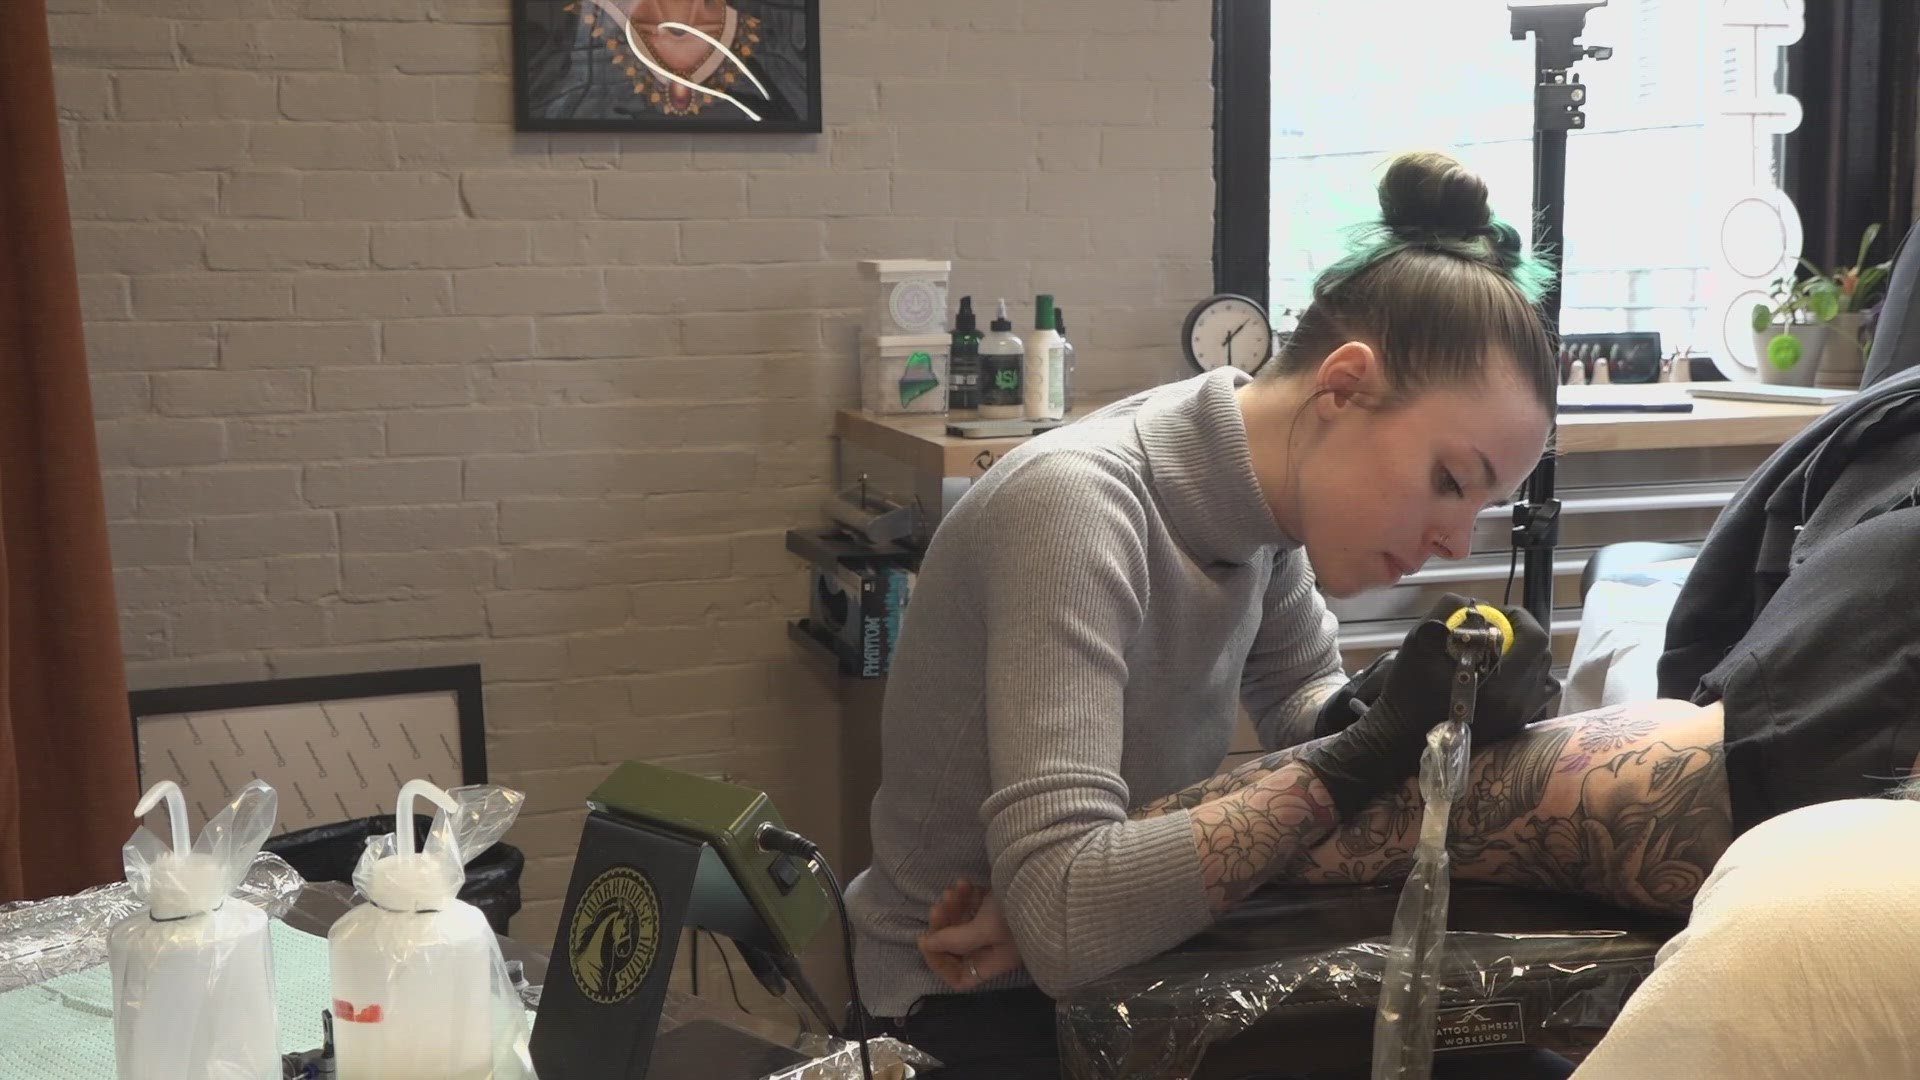 "When I first started, I was told I would not be licensed because I was female and that a tattoo shop is no place for a female," one tattoo artist said.